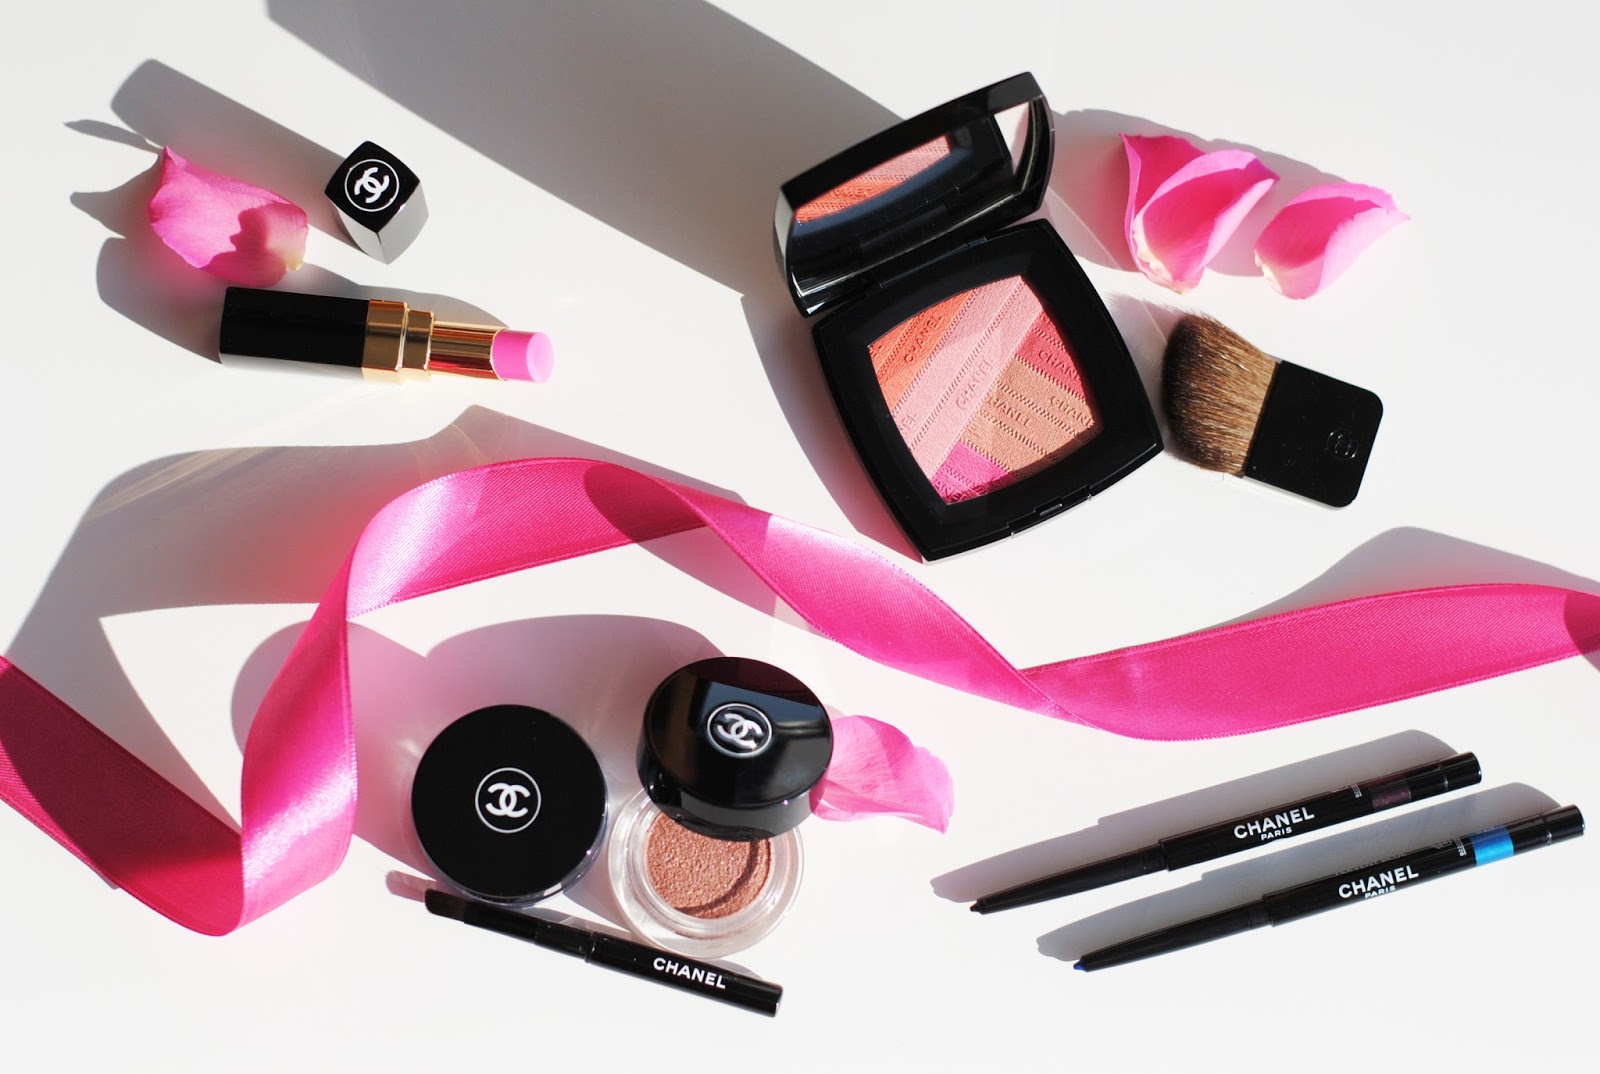 Chanel L.A. Sunrise Collection - Spring 2016 (image features